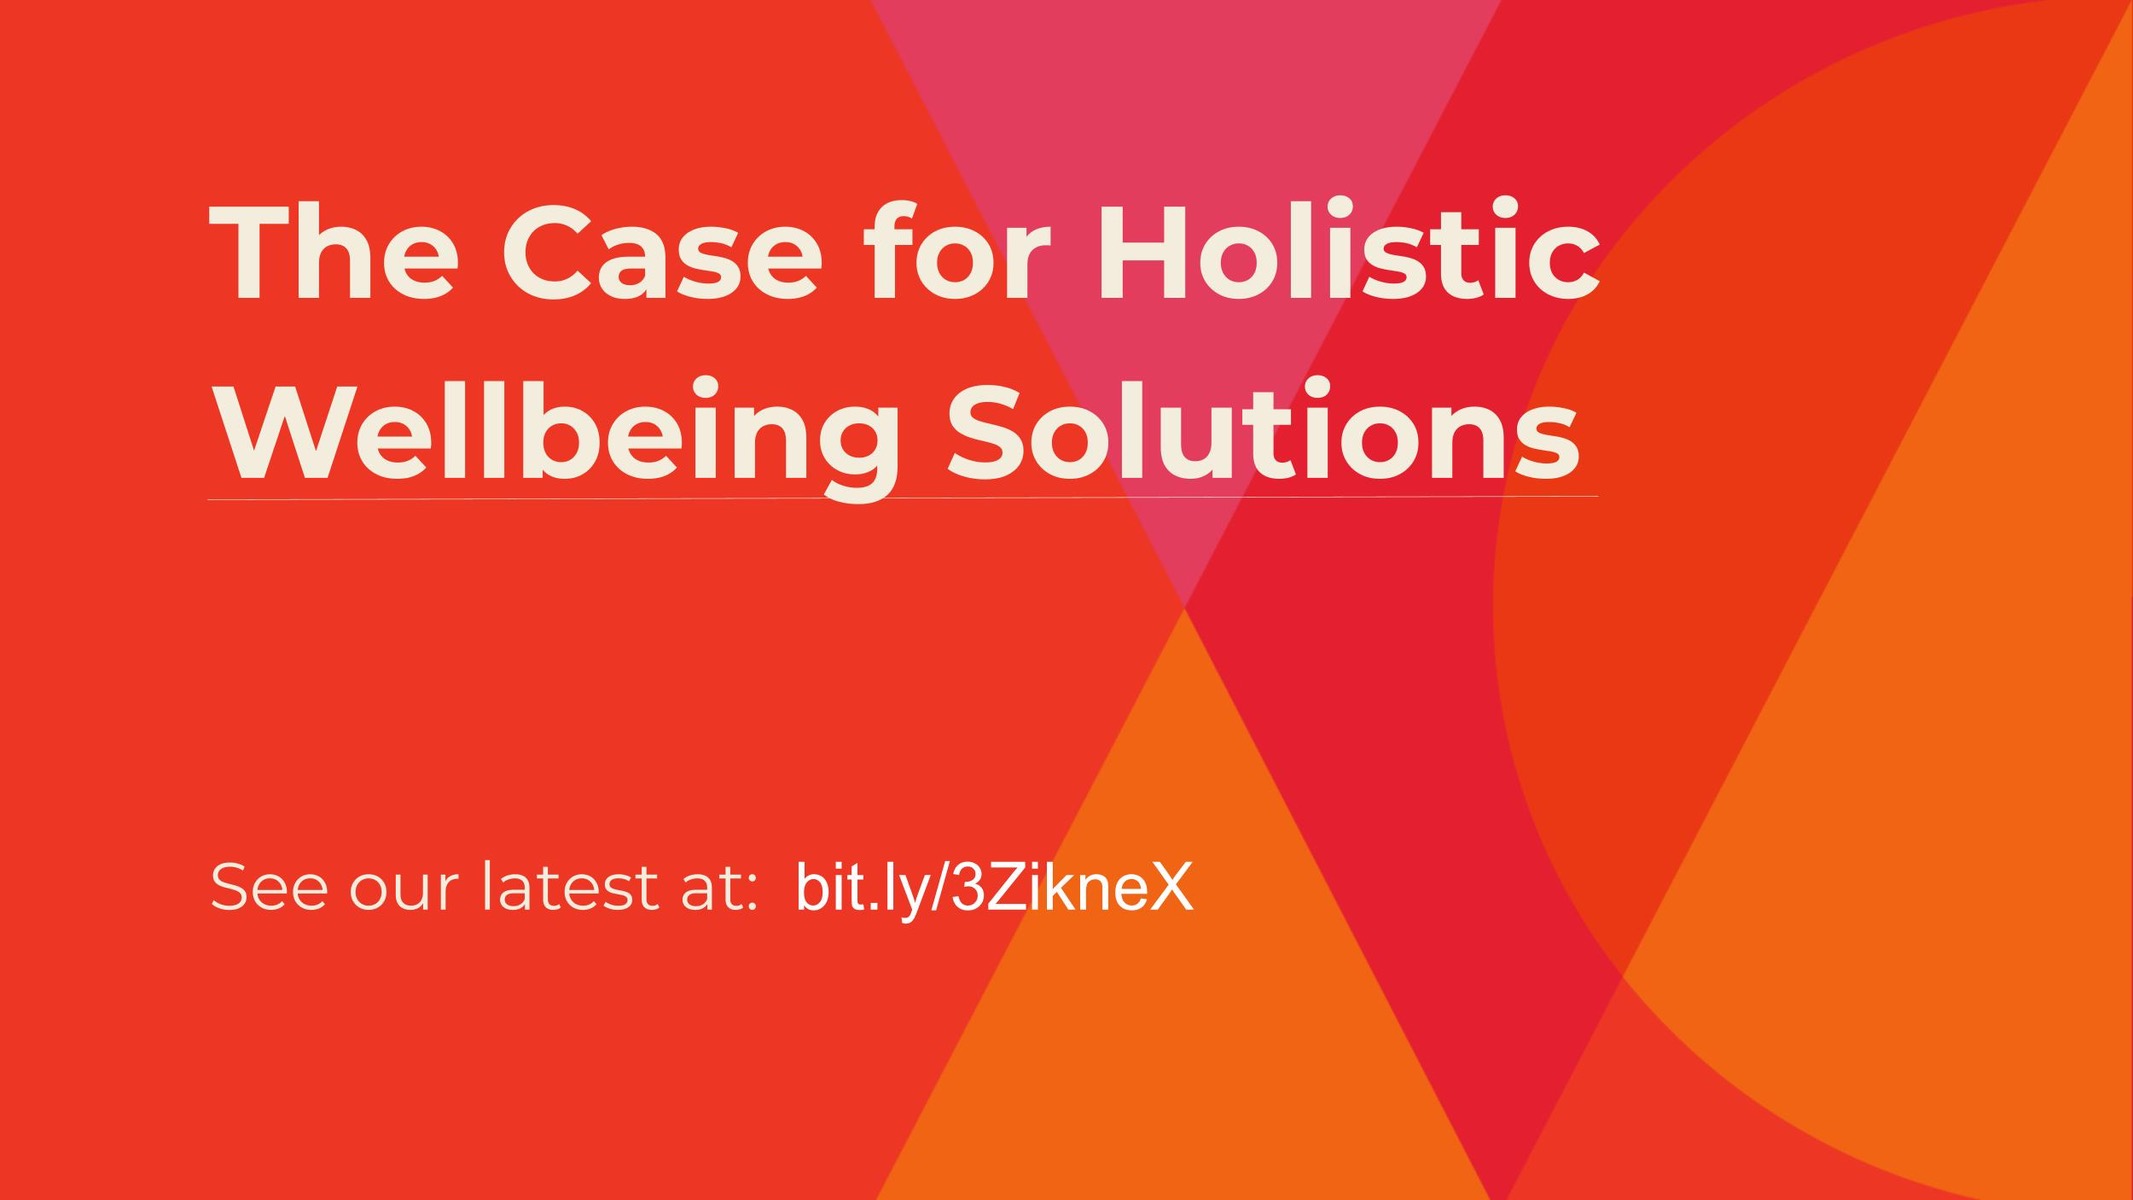 The Case for Holistic Wellbeing